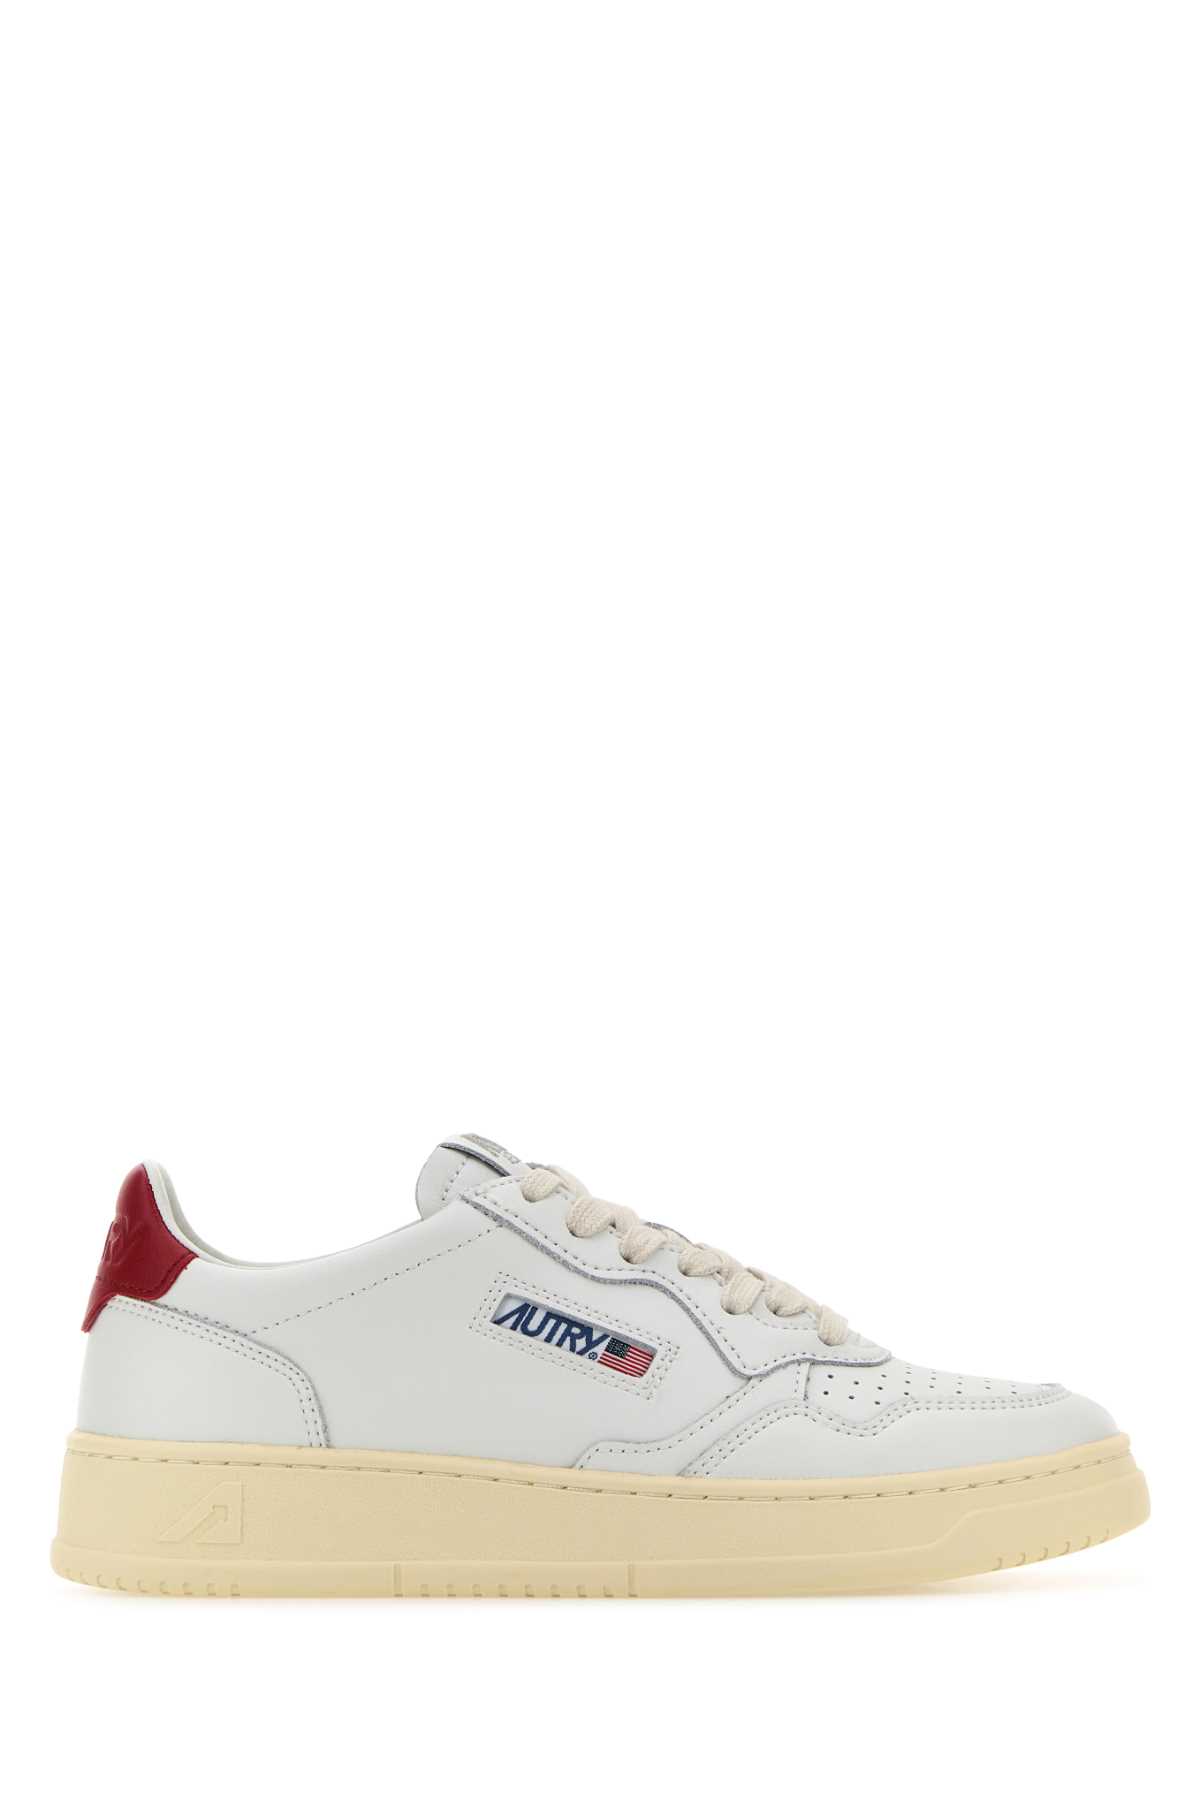 Shop Autry White Leather Medalist Sneakers In Ll21